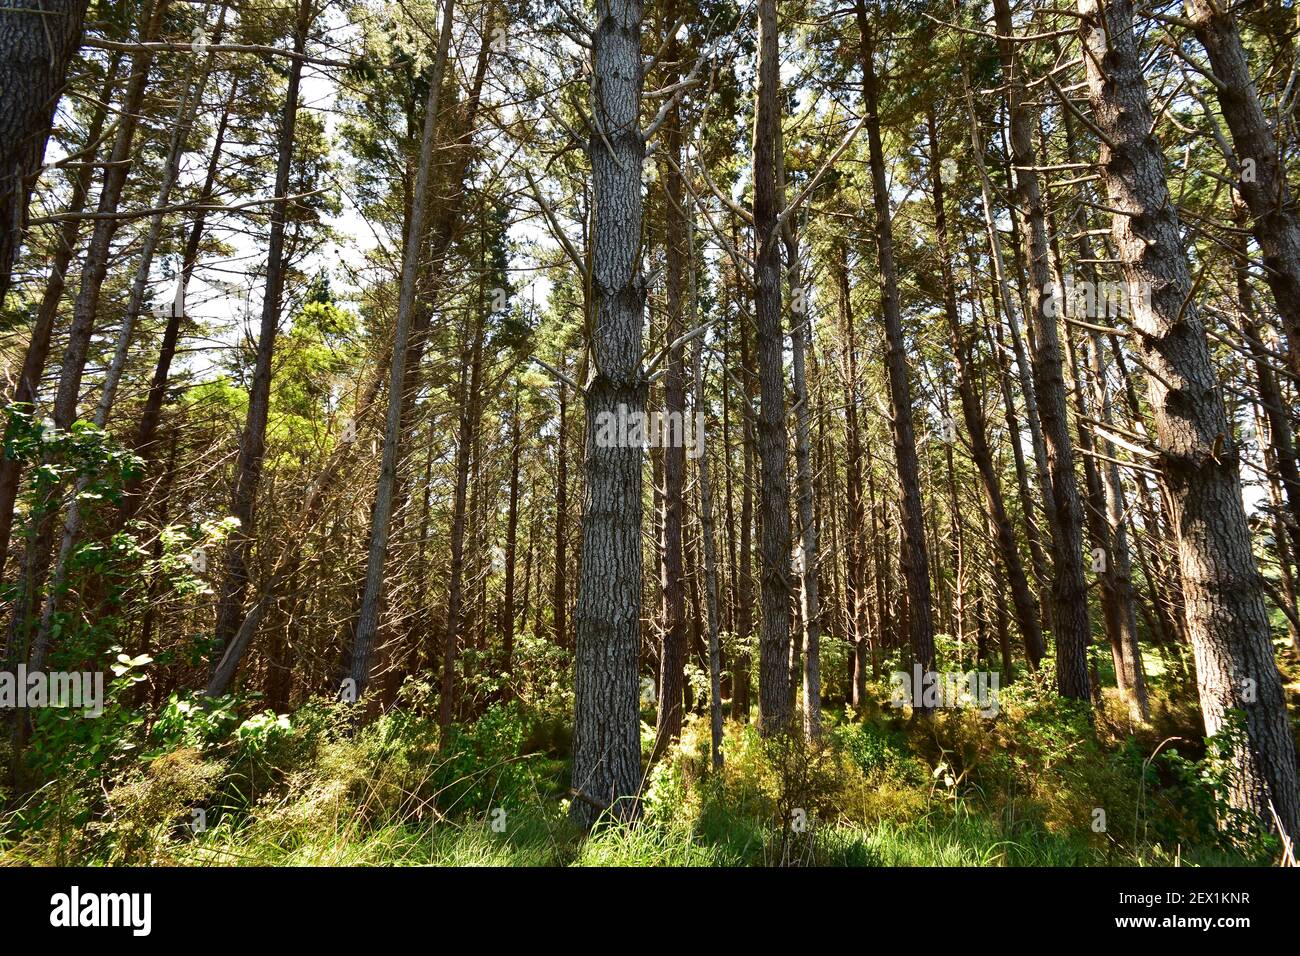 Fast growing pine forest artificially planted for timber industry. Stock Photo